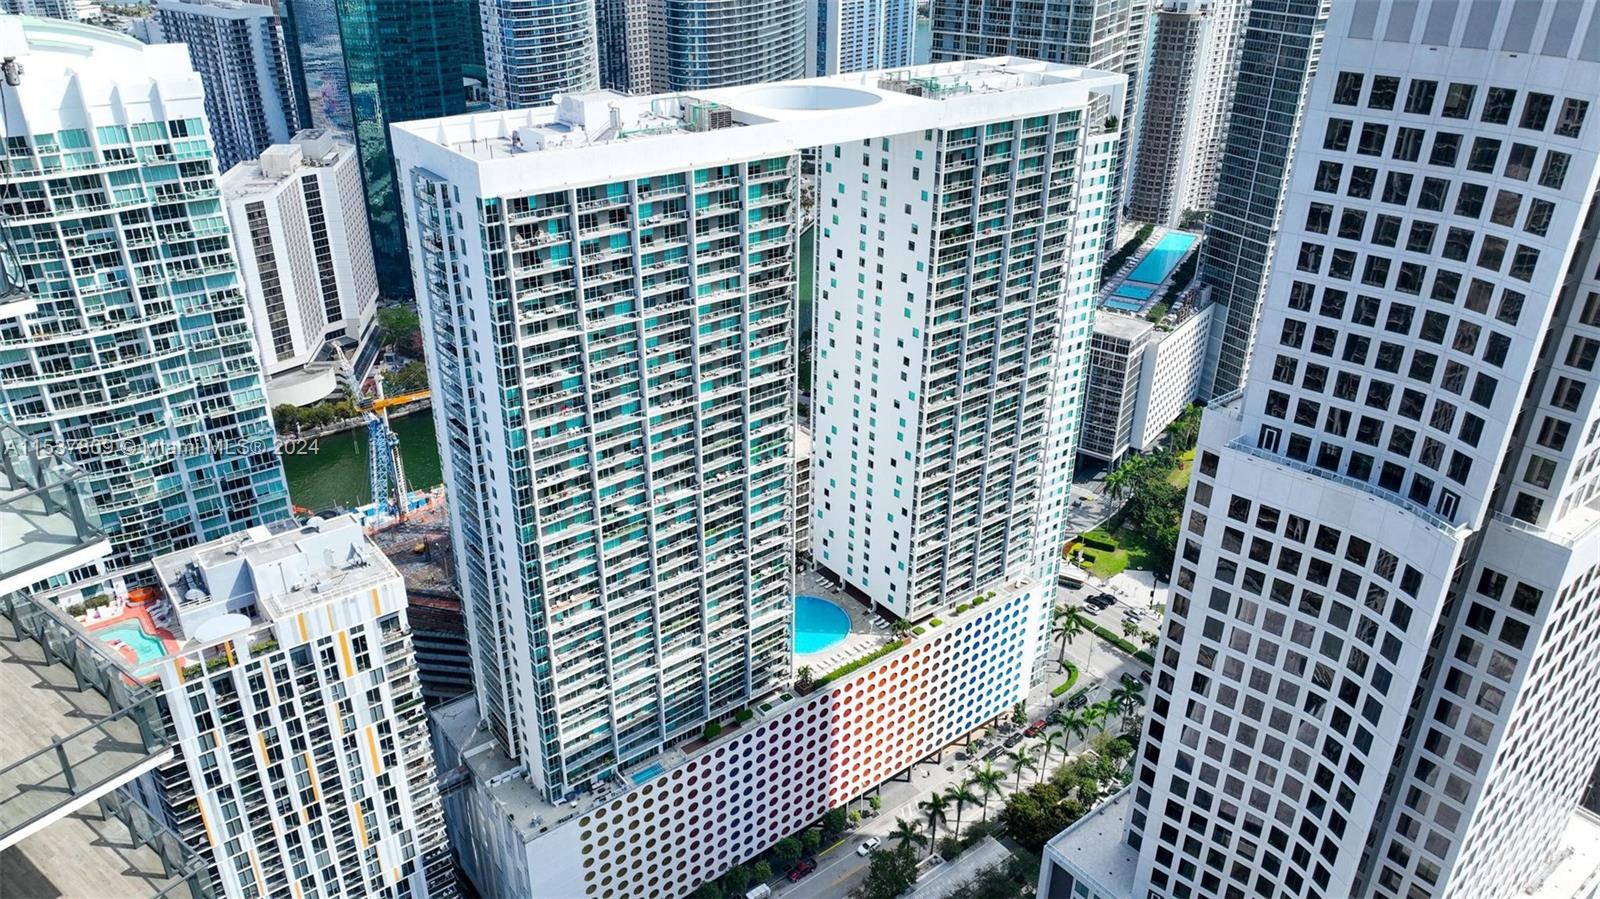 Spectacular 2 Bedroom/2 Bathroom Condo in the Heart of Brickell. This Condo Features an Open Kitchen with Stainless Steel Appliances. Split Floor Plan for The Ultimate Privacy. Both Bathrooms Have Dual Sinks, Showers and the Primary Bath Also Has a Tub. Unit Has Been Freshly Painted and Floors Throughout Have Been Updated. Gorgeous North East Views From the Large Balcony. Building Has a Ton of Amenities, Including Pool, Billiards, State of the Art Gym, Clubhouse, Rooftop Jacuzzi and So Much More!